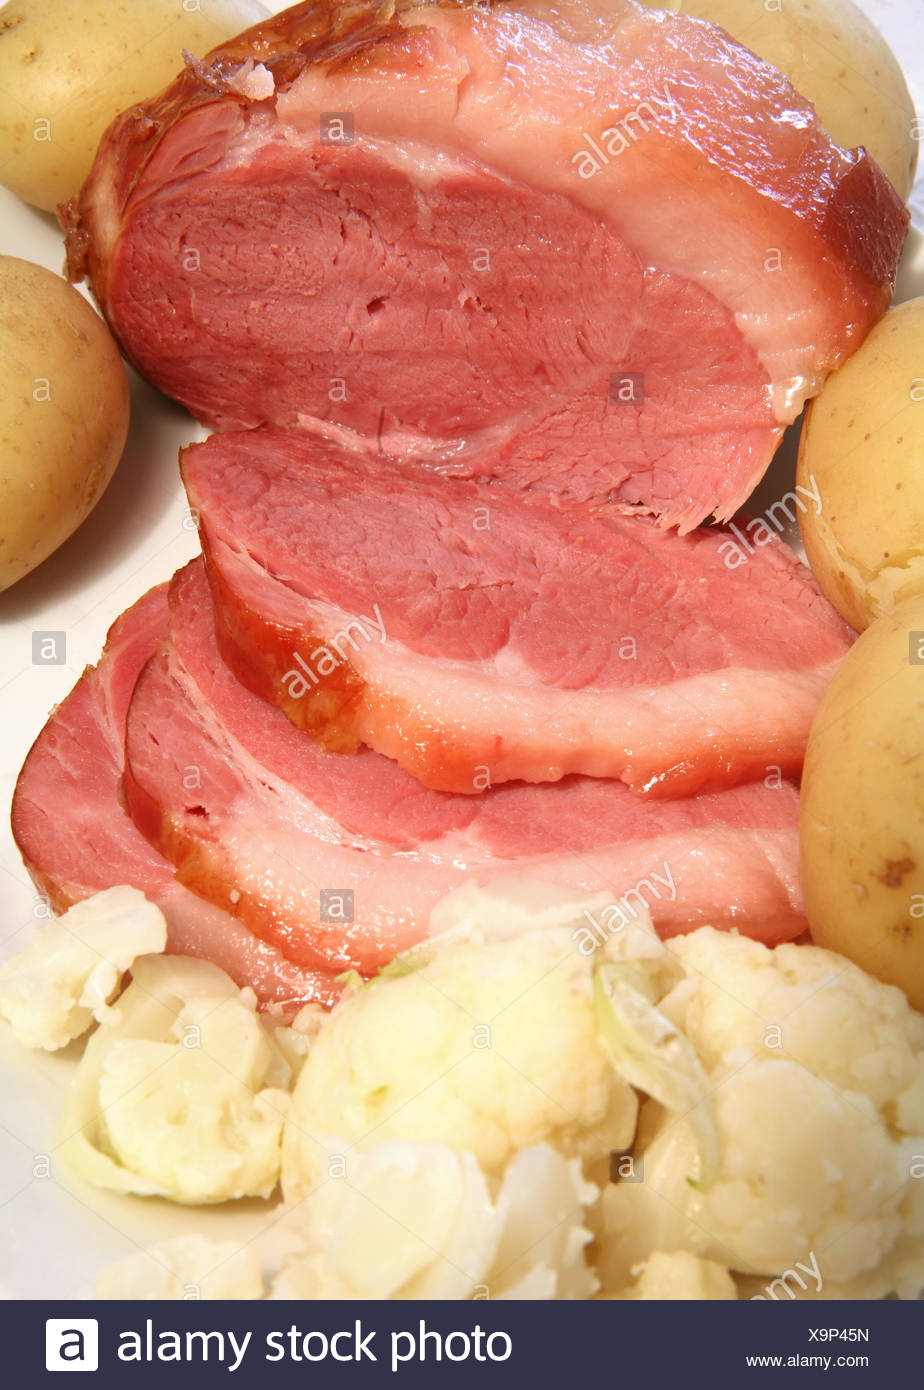 How Long To Oven Bake Gammon - The tutorial shows you how to bake pork ...